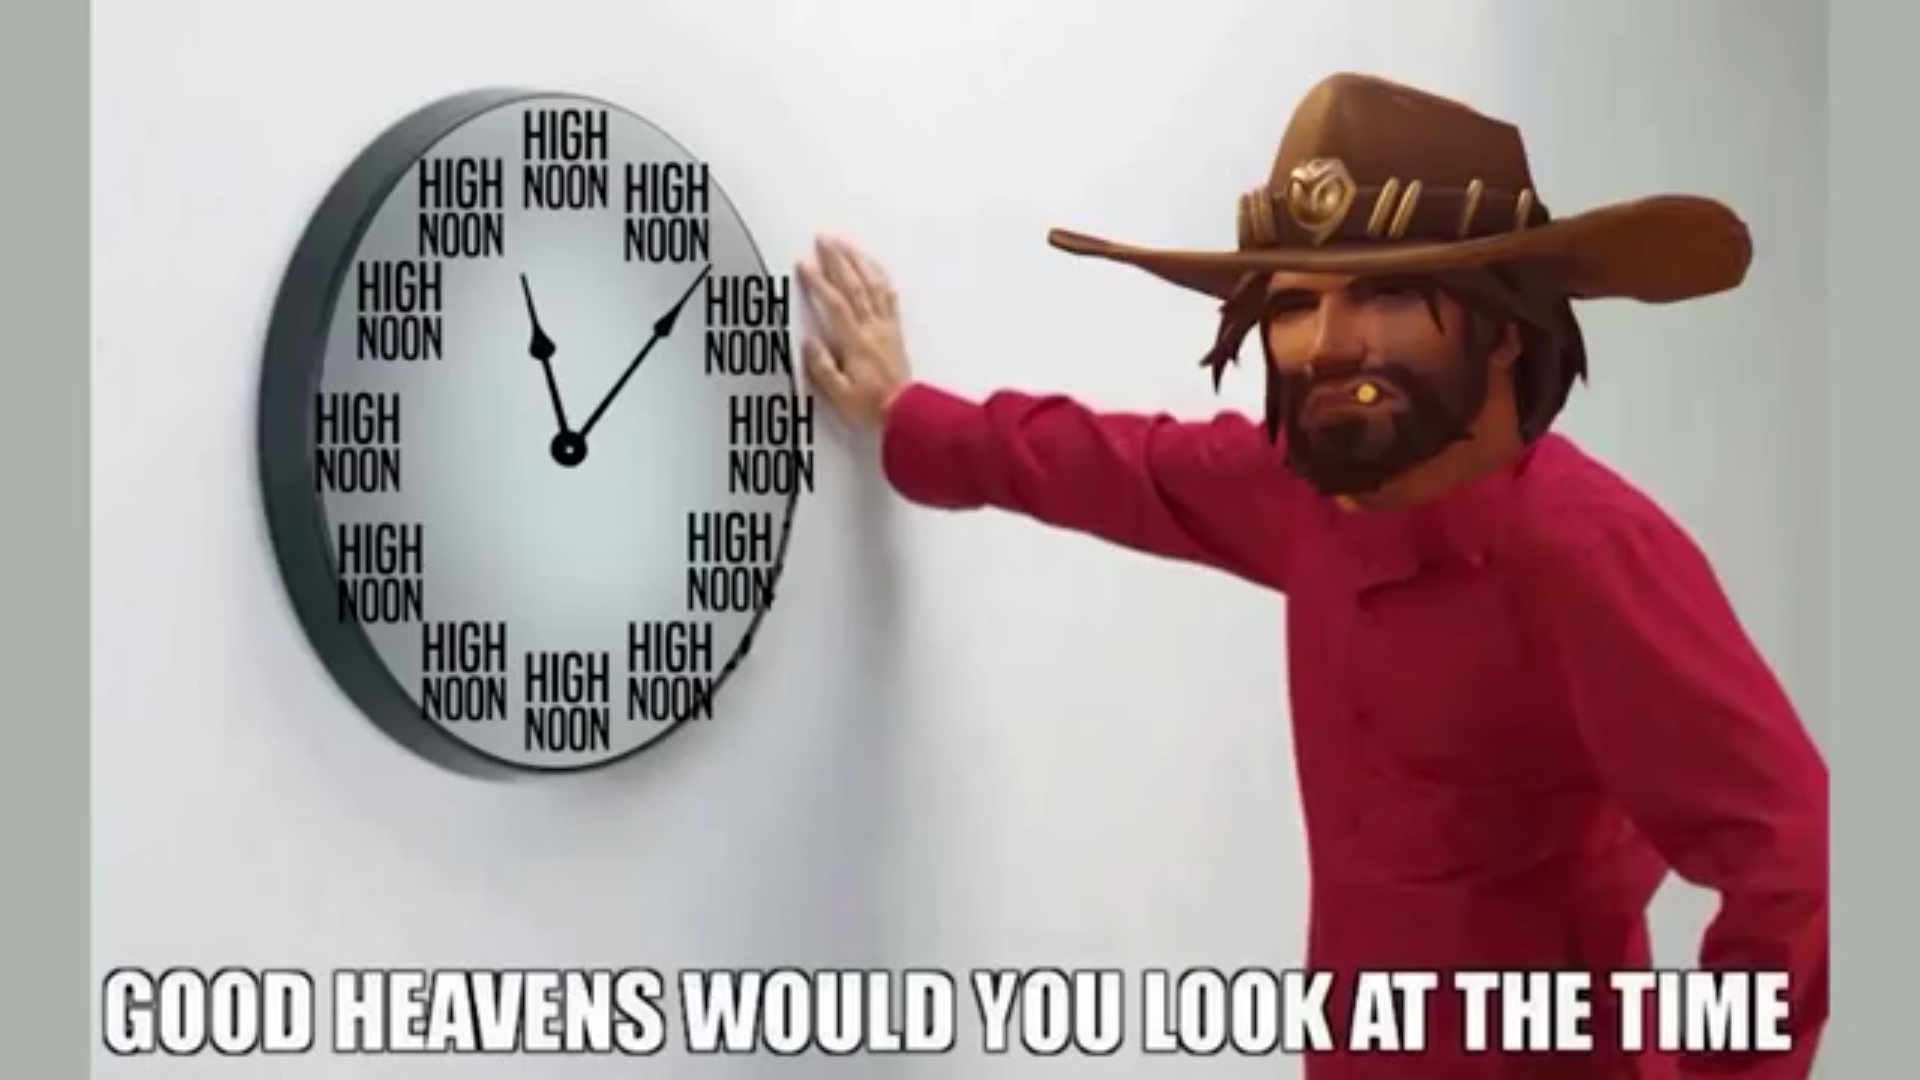 It's high noon somewhere in the world